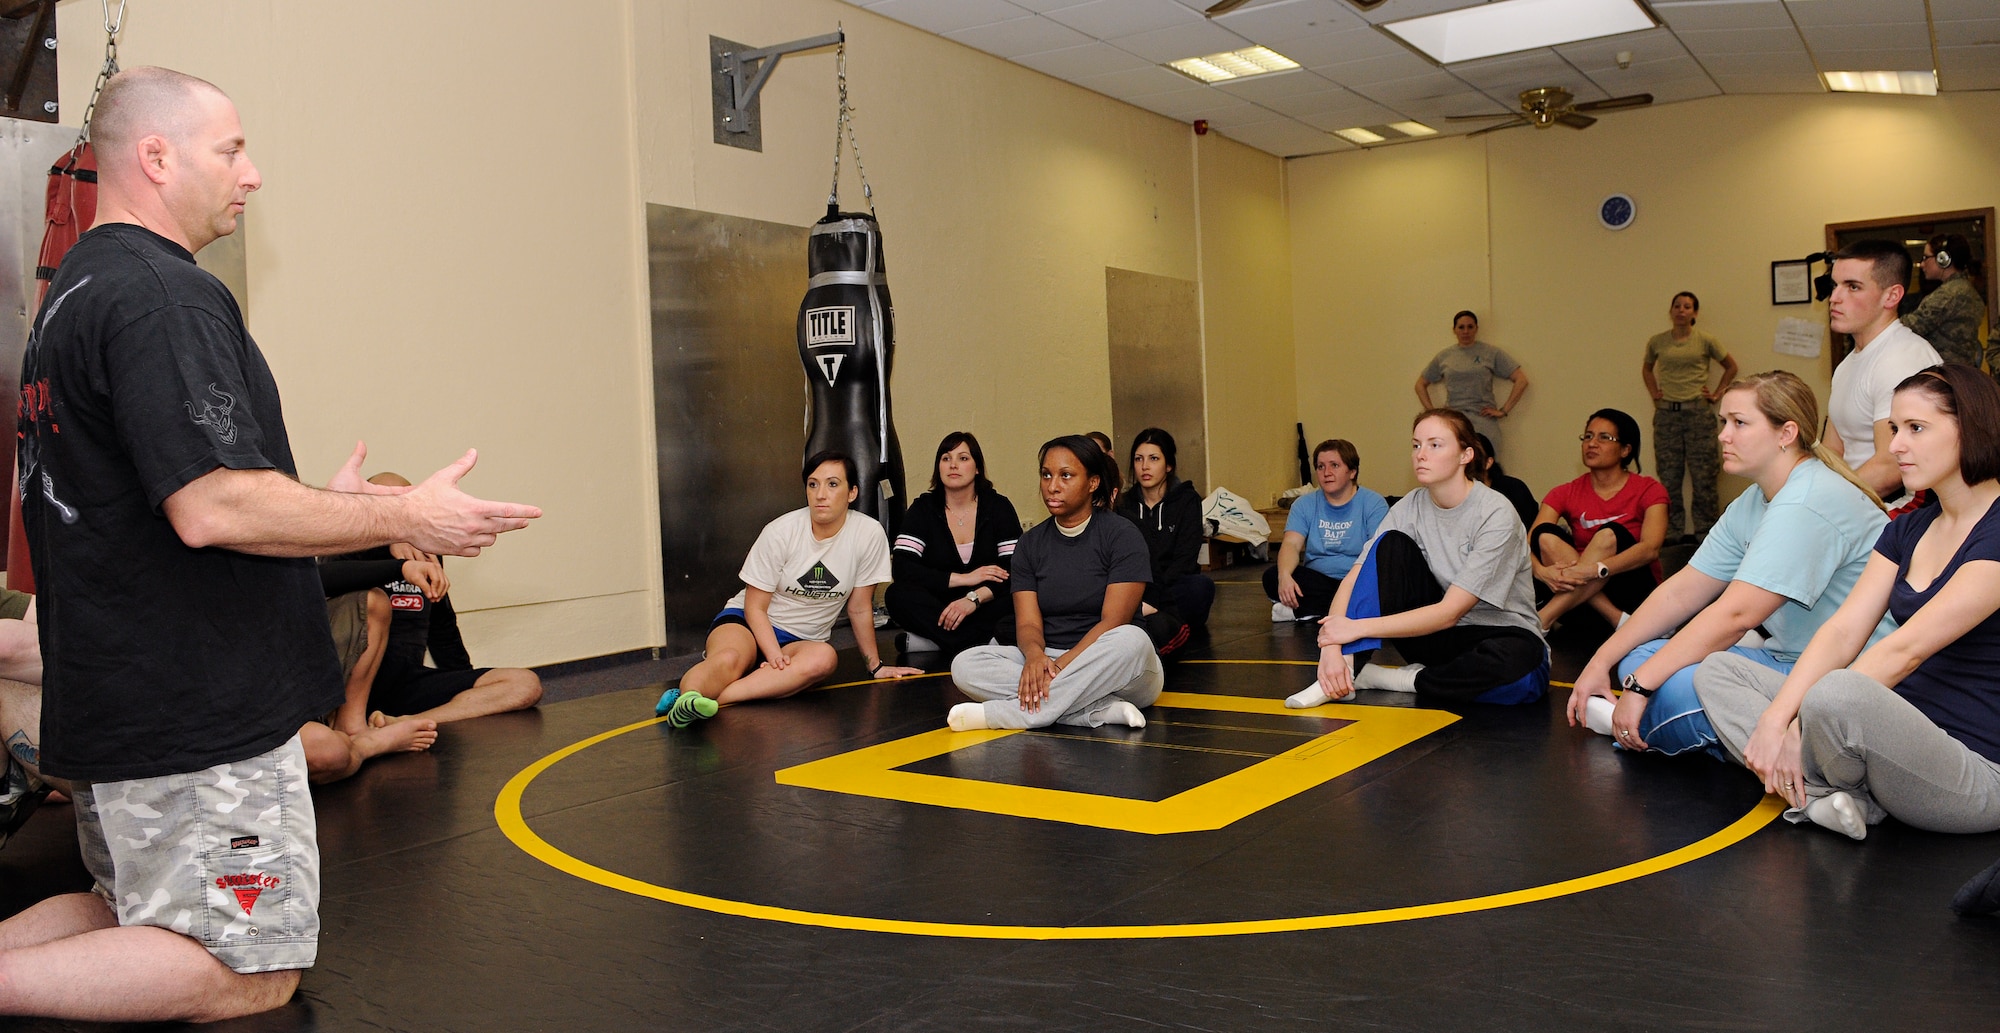 SPANGDAHLEM AIR BASE, Germany – Master Sgt. John Cammarata, 52nd Civil Engineer Squadron member and mixed martial arts coach, speaks to a group of women before beginning a self-defense class at Skelton Memorial Fitness Center March 26. The class was one of many events conducted during Sexual Assault Awareness Month to make people more aware of sexual assault prevention and response programs. (U.S. Air Force photo/Senior Airman Benjamin Wilson)